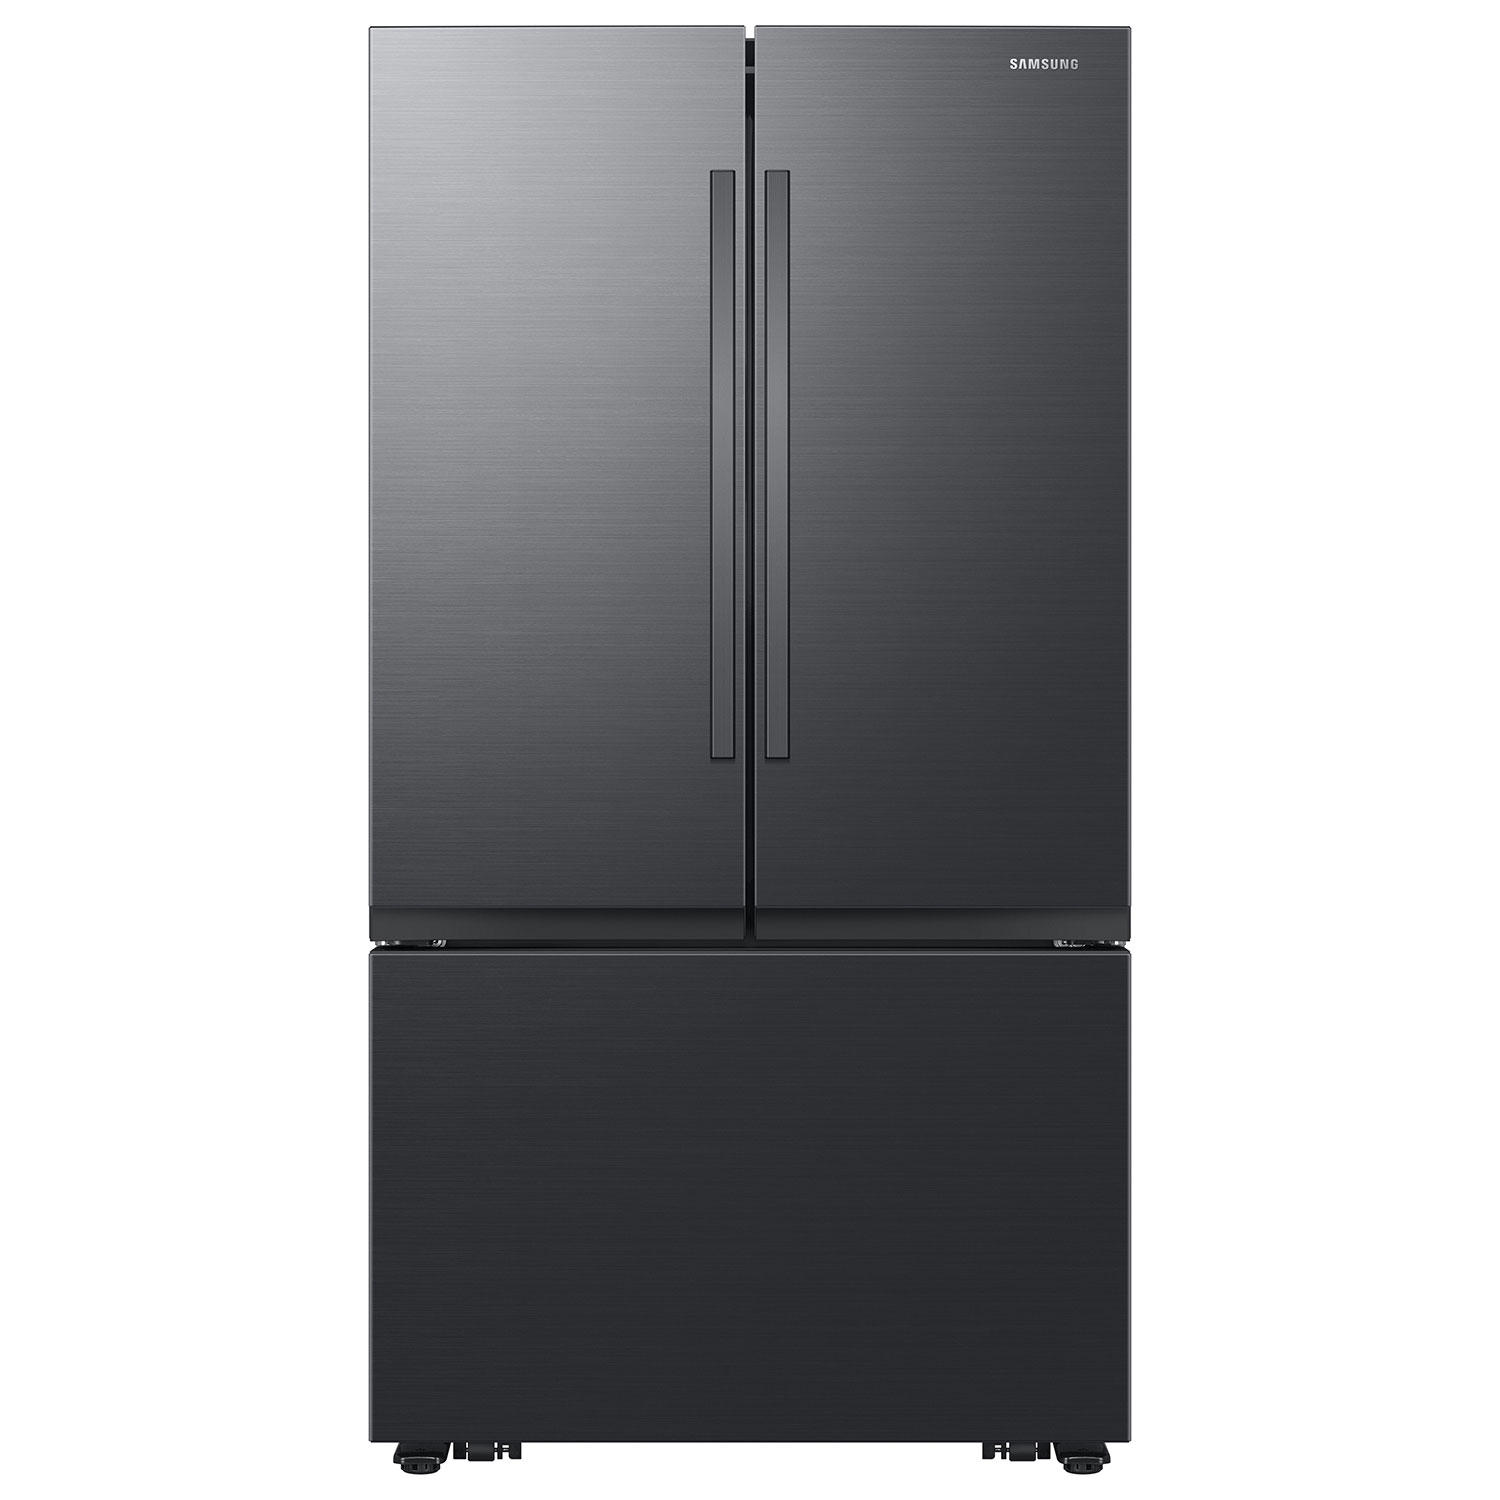 Samsung 32 Cu. Ft. Mega Capacity French Door Refrigerator w/ Dual Auto Ice Maker (Black Stainless Steel)